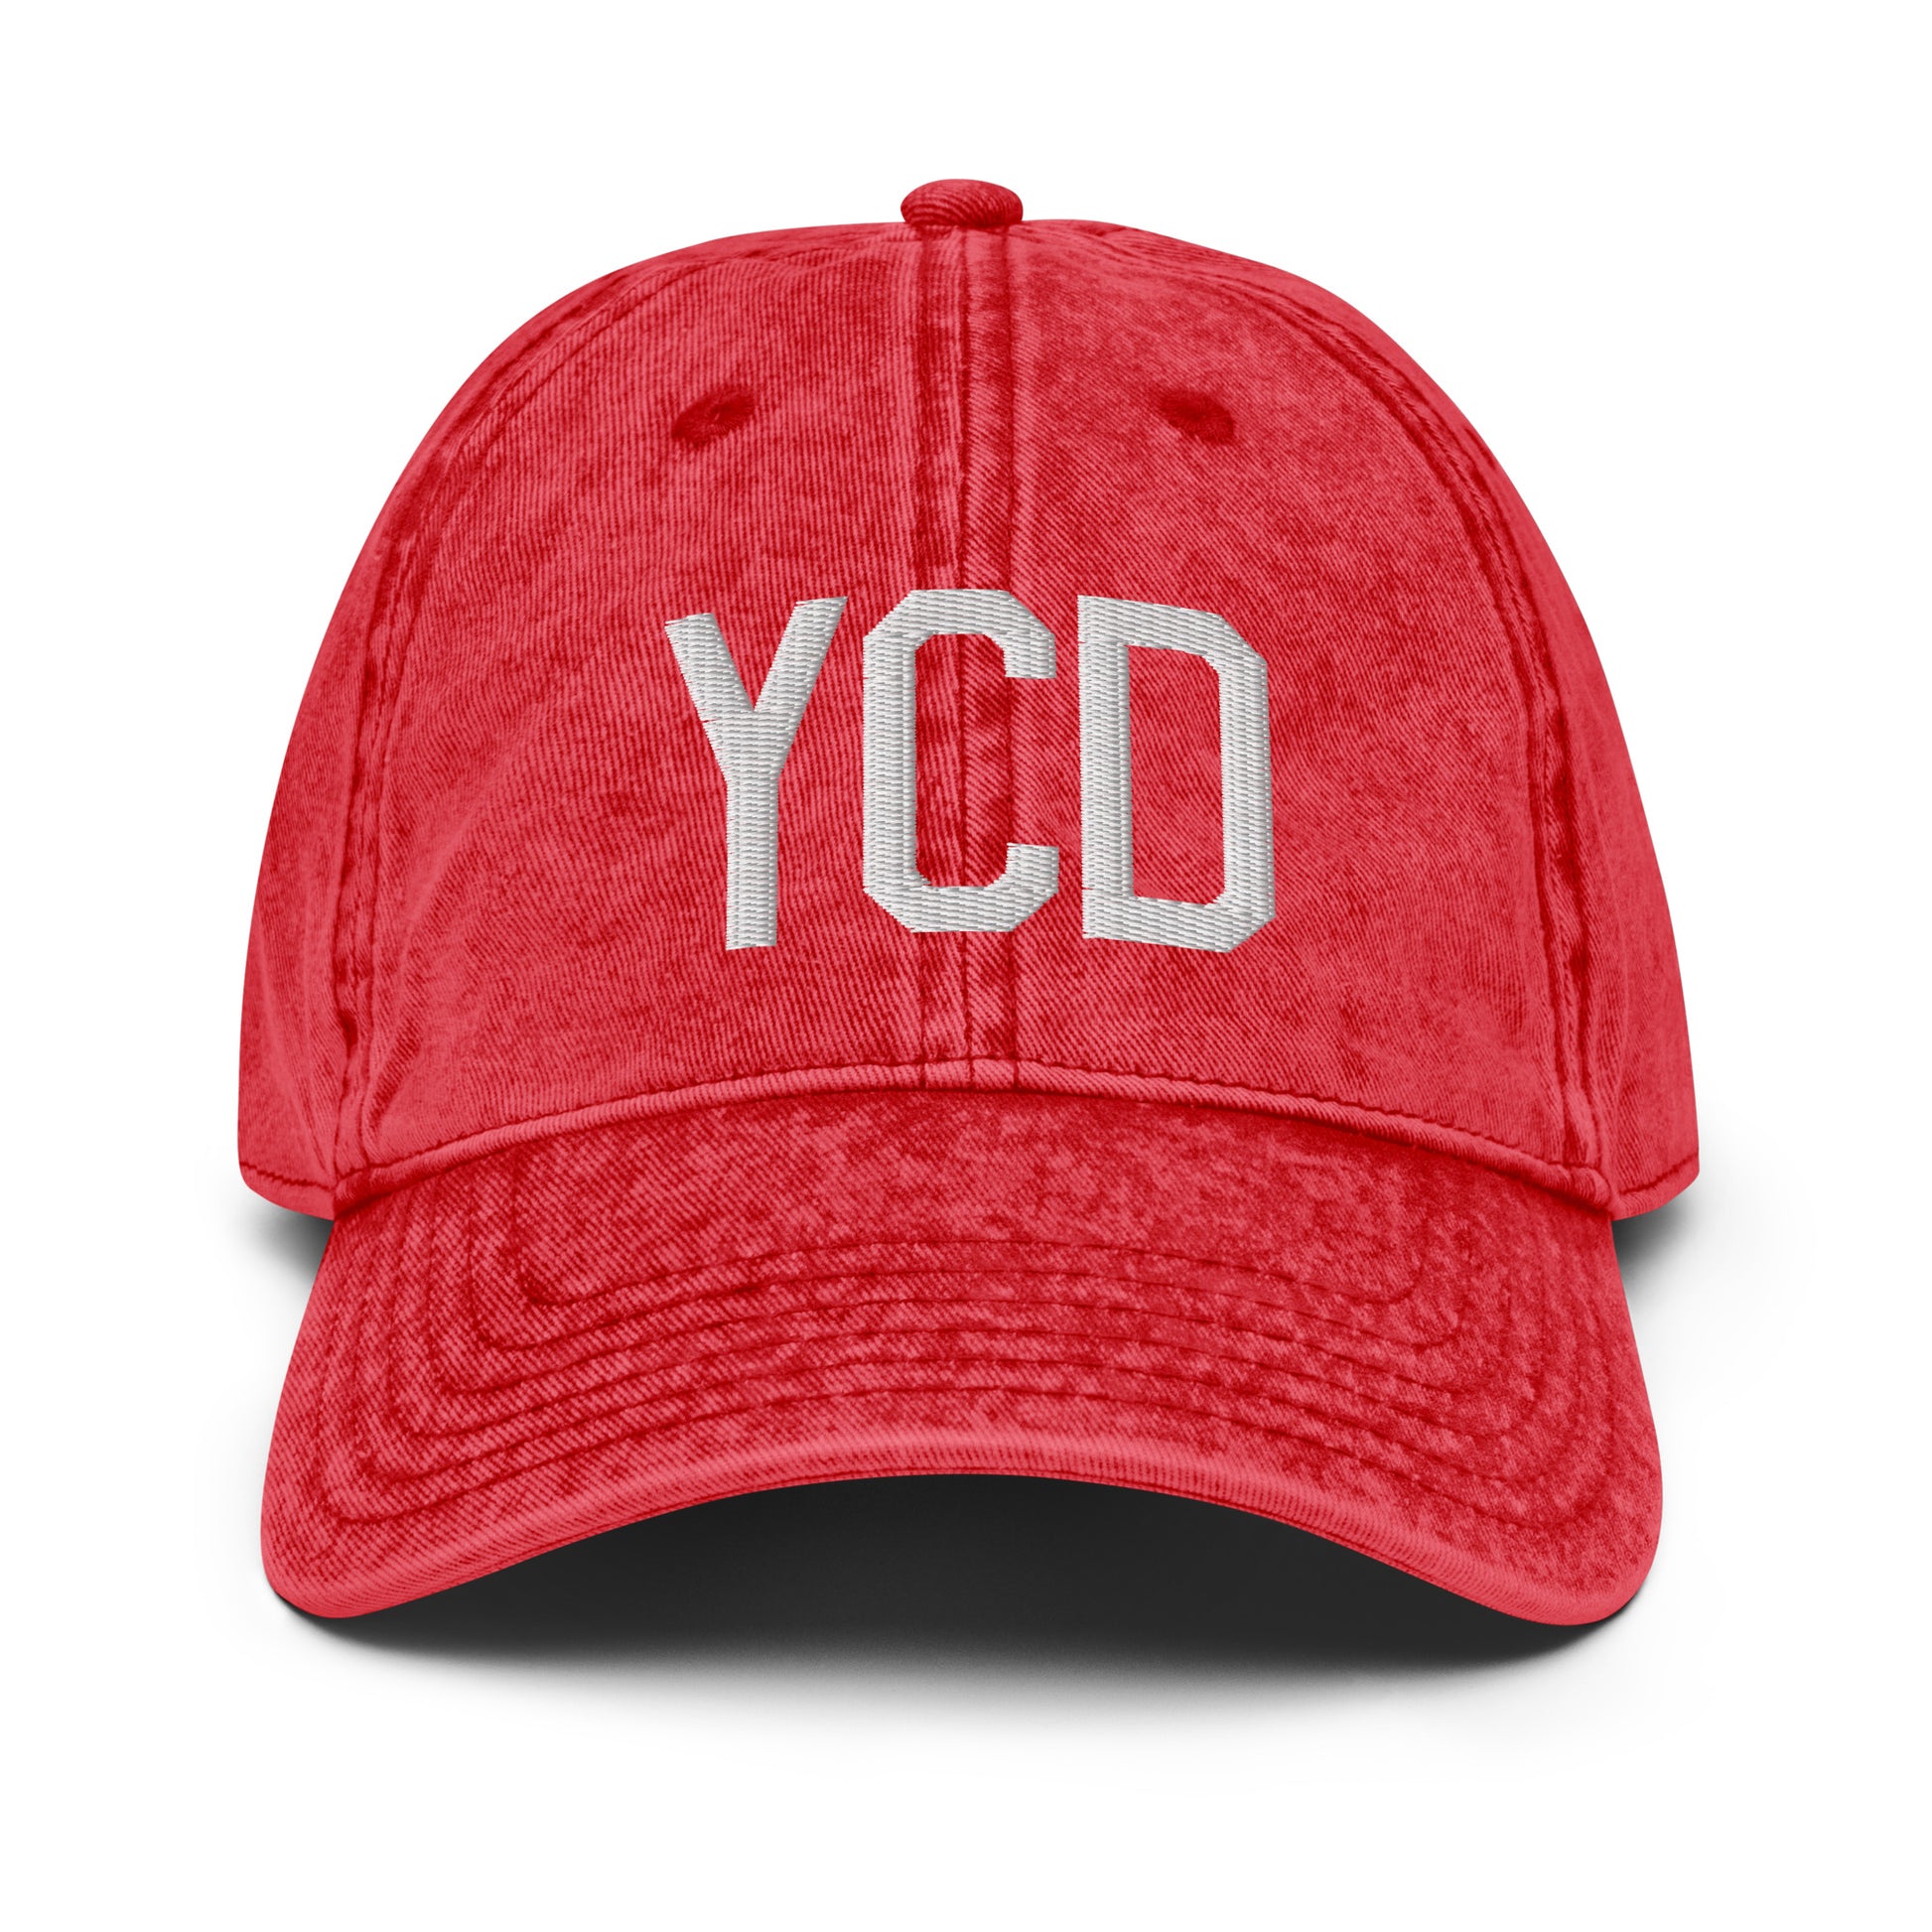 Airport Code Twill Cap - White • YCD Nanaimo • YHM Designs - Image 22